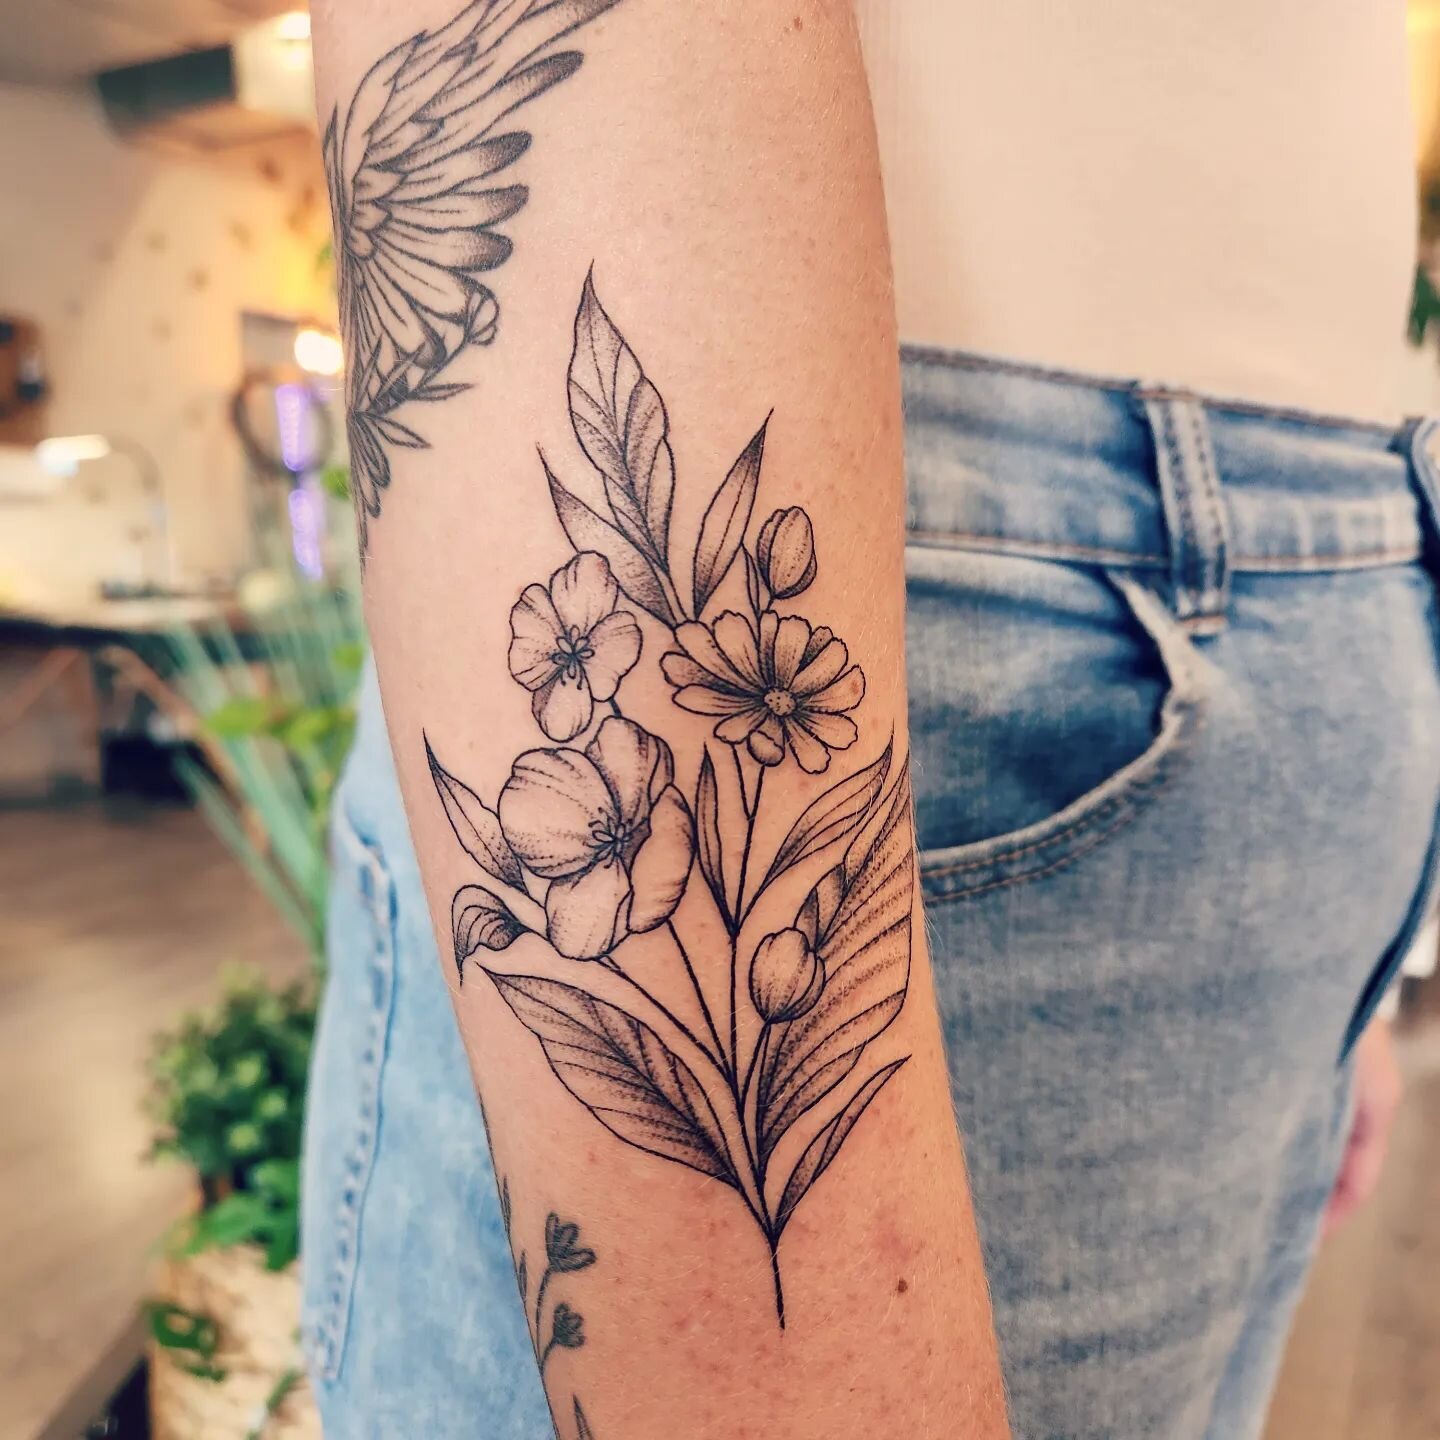 Lil wildflower bouquet next to healed owl for an og client 🥰
.
.
#vancouvertattoo #yvrtattoo #blacktattoos #vegantattoo #yvrvegan #vancouvertattoos #yvrtattoos #vancouvertattooartist #blackandgreytattoos #vancouvervegantattoo #newwestminstertattoo #